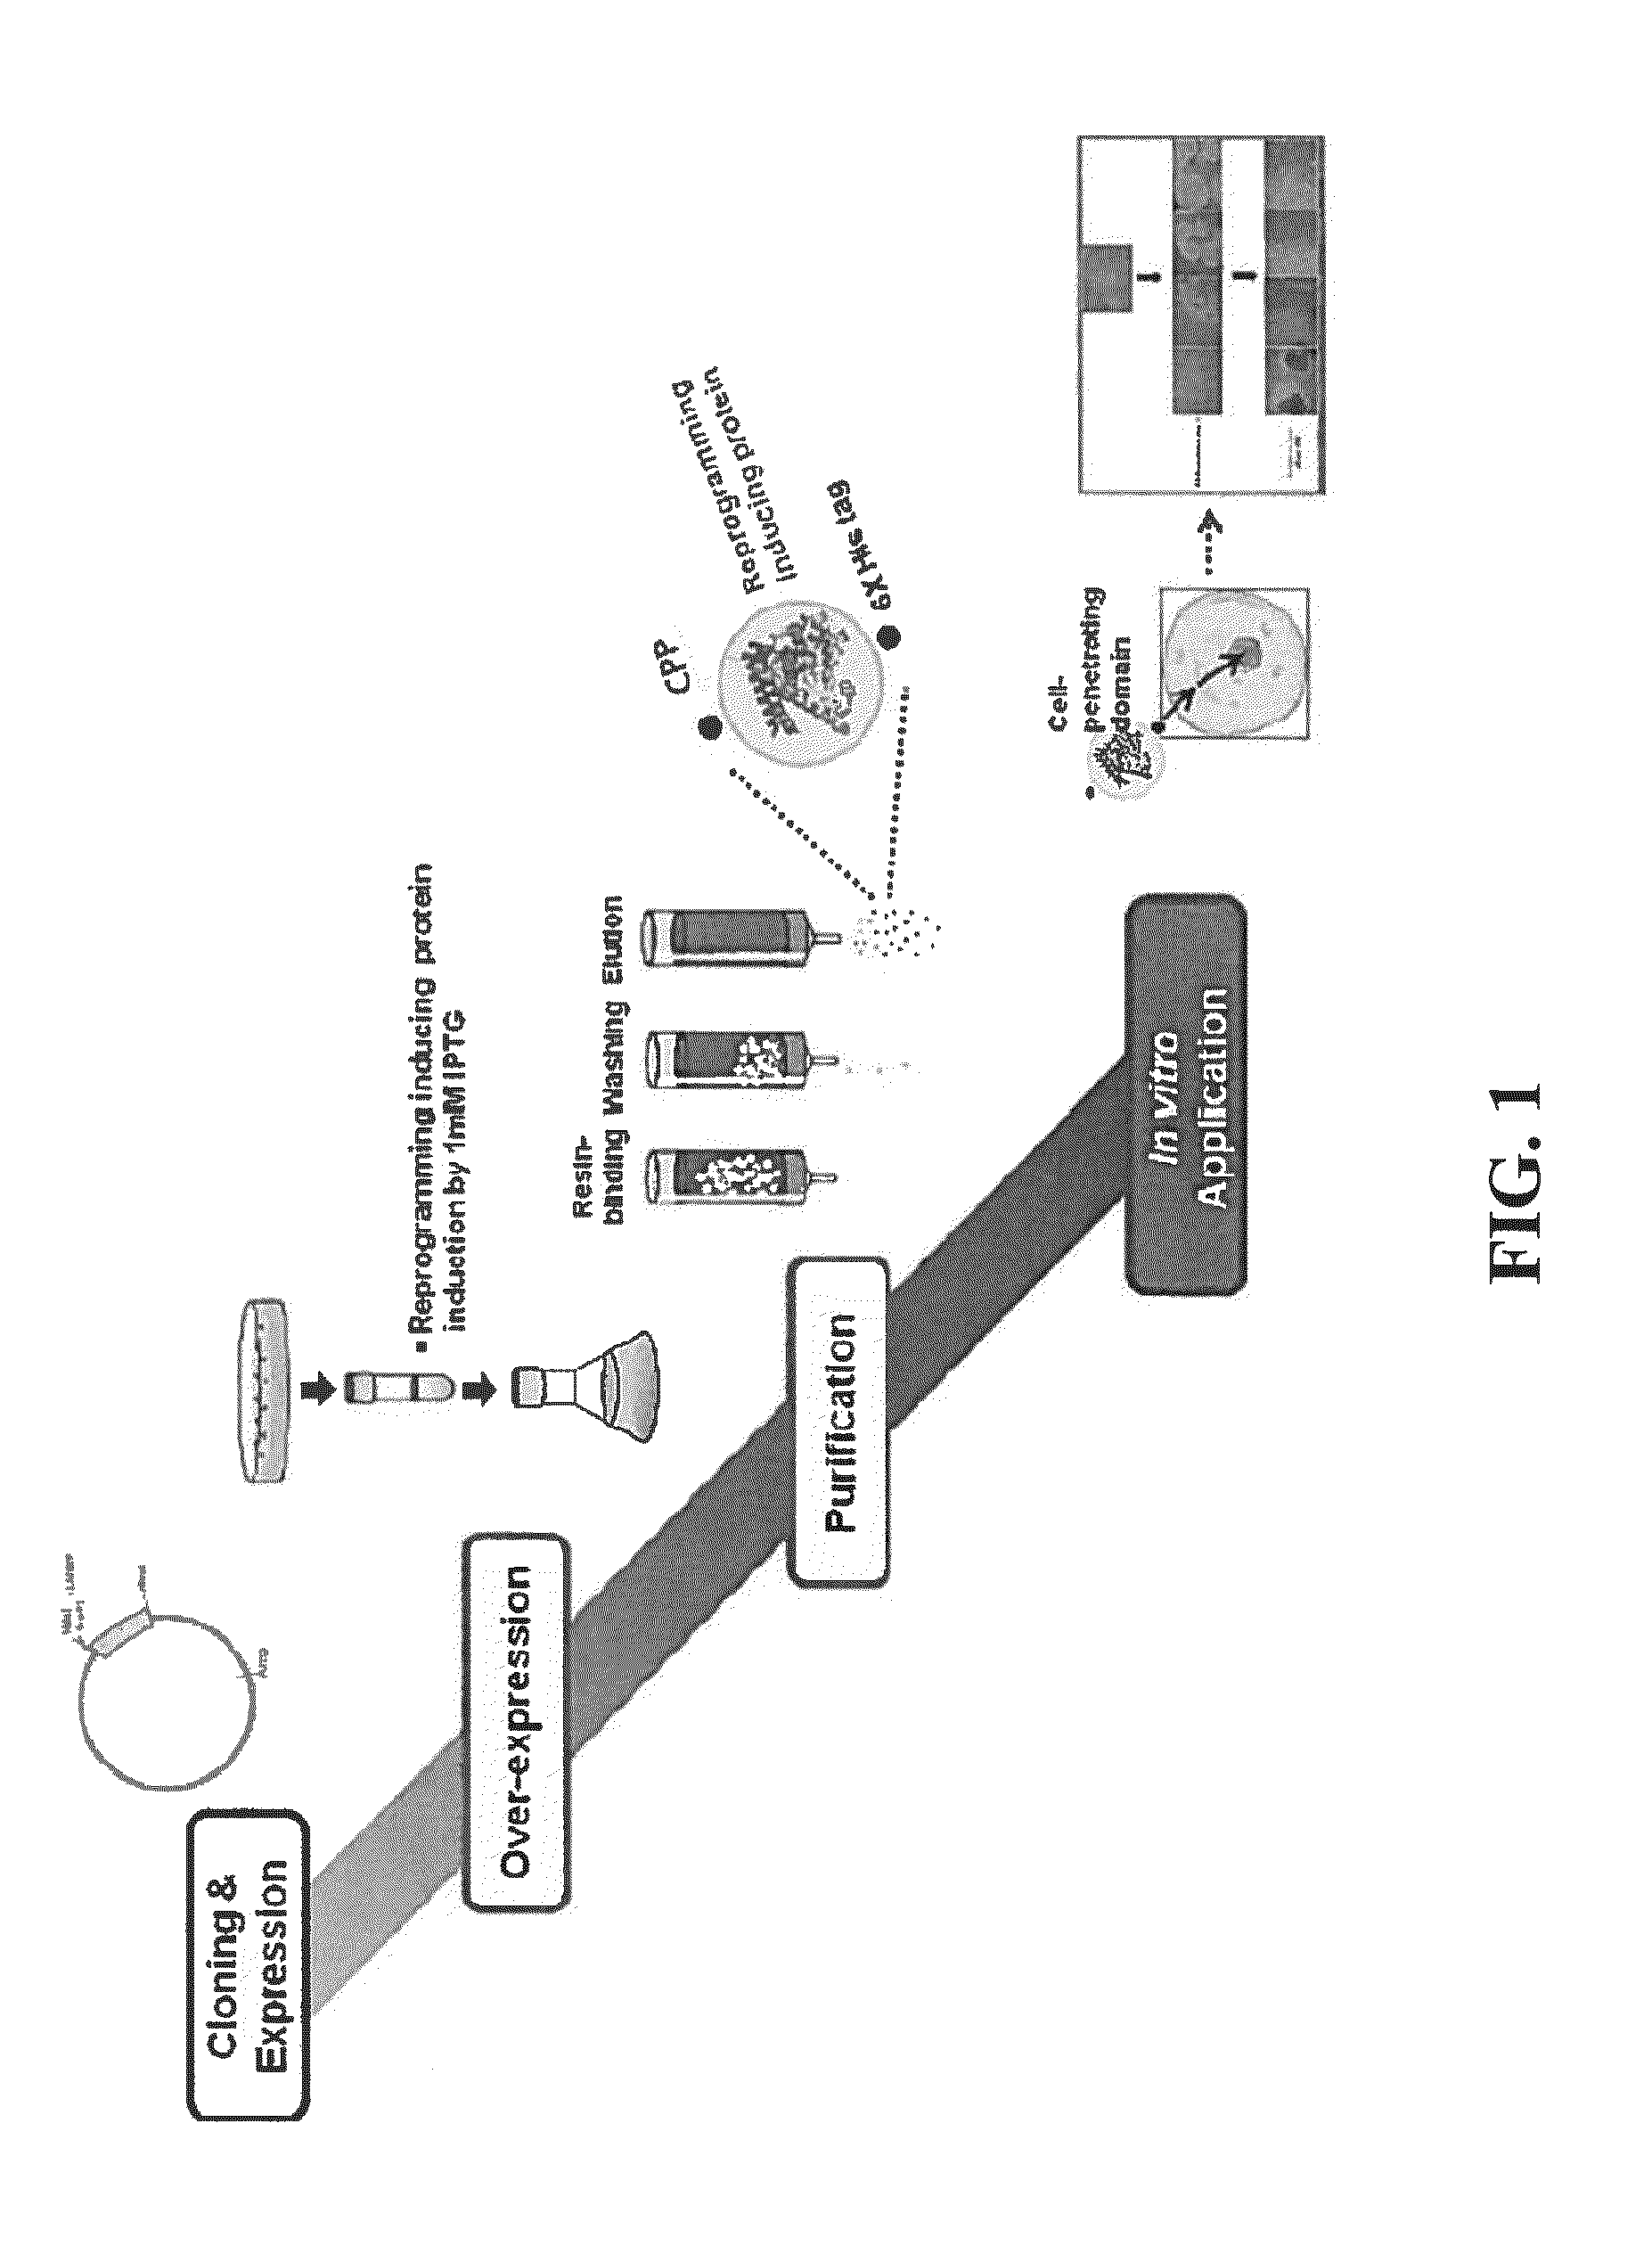 Cell permeable fusion protein for facilitating reprogramming induction and use thereof